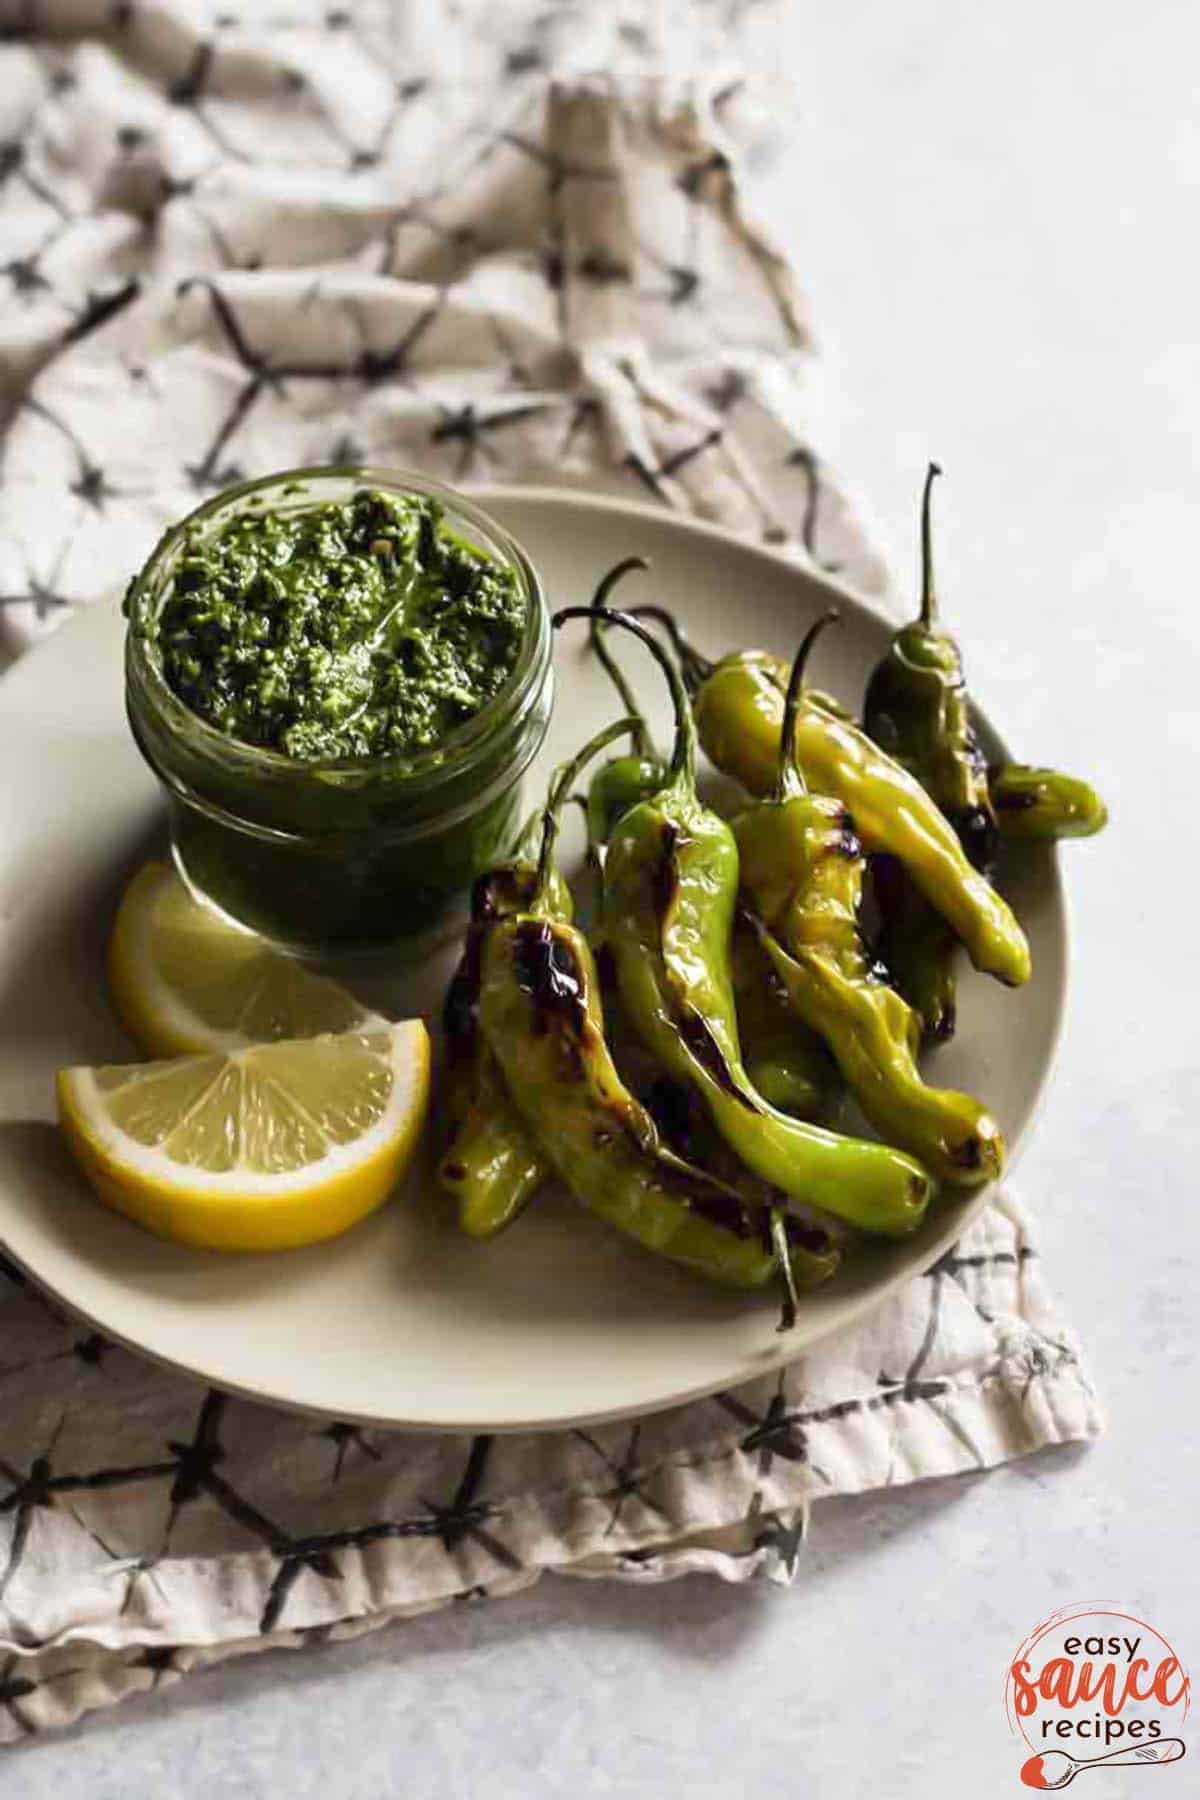 parsley pesto in a glass jar on a plate with lemon slices and blistered shishito peppers